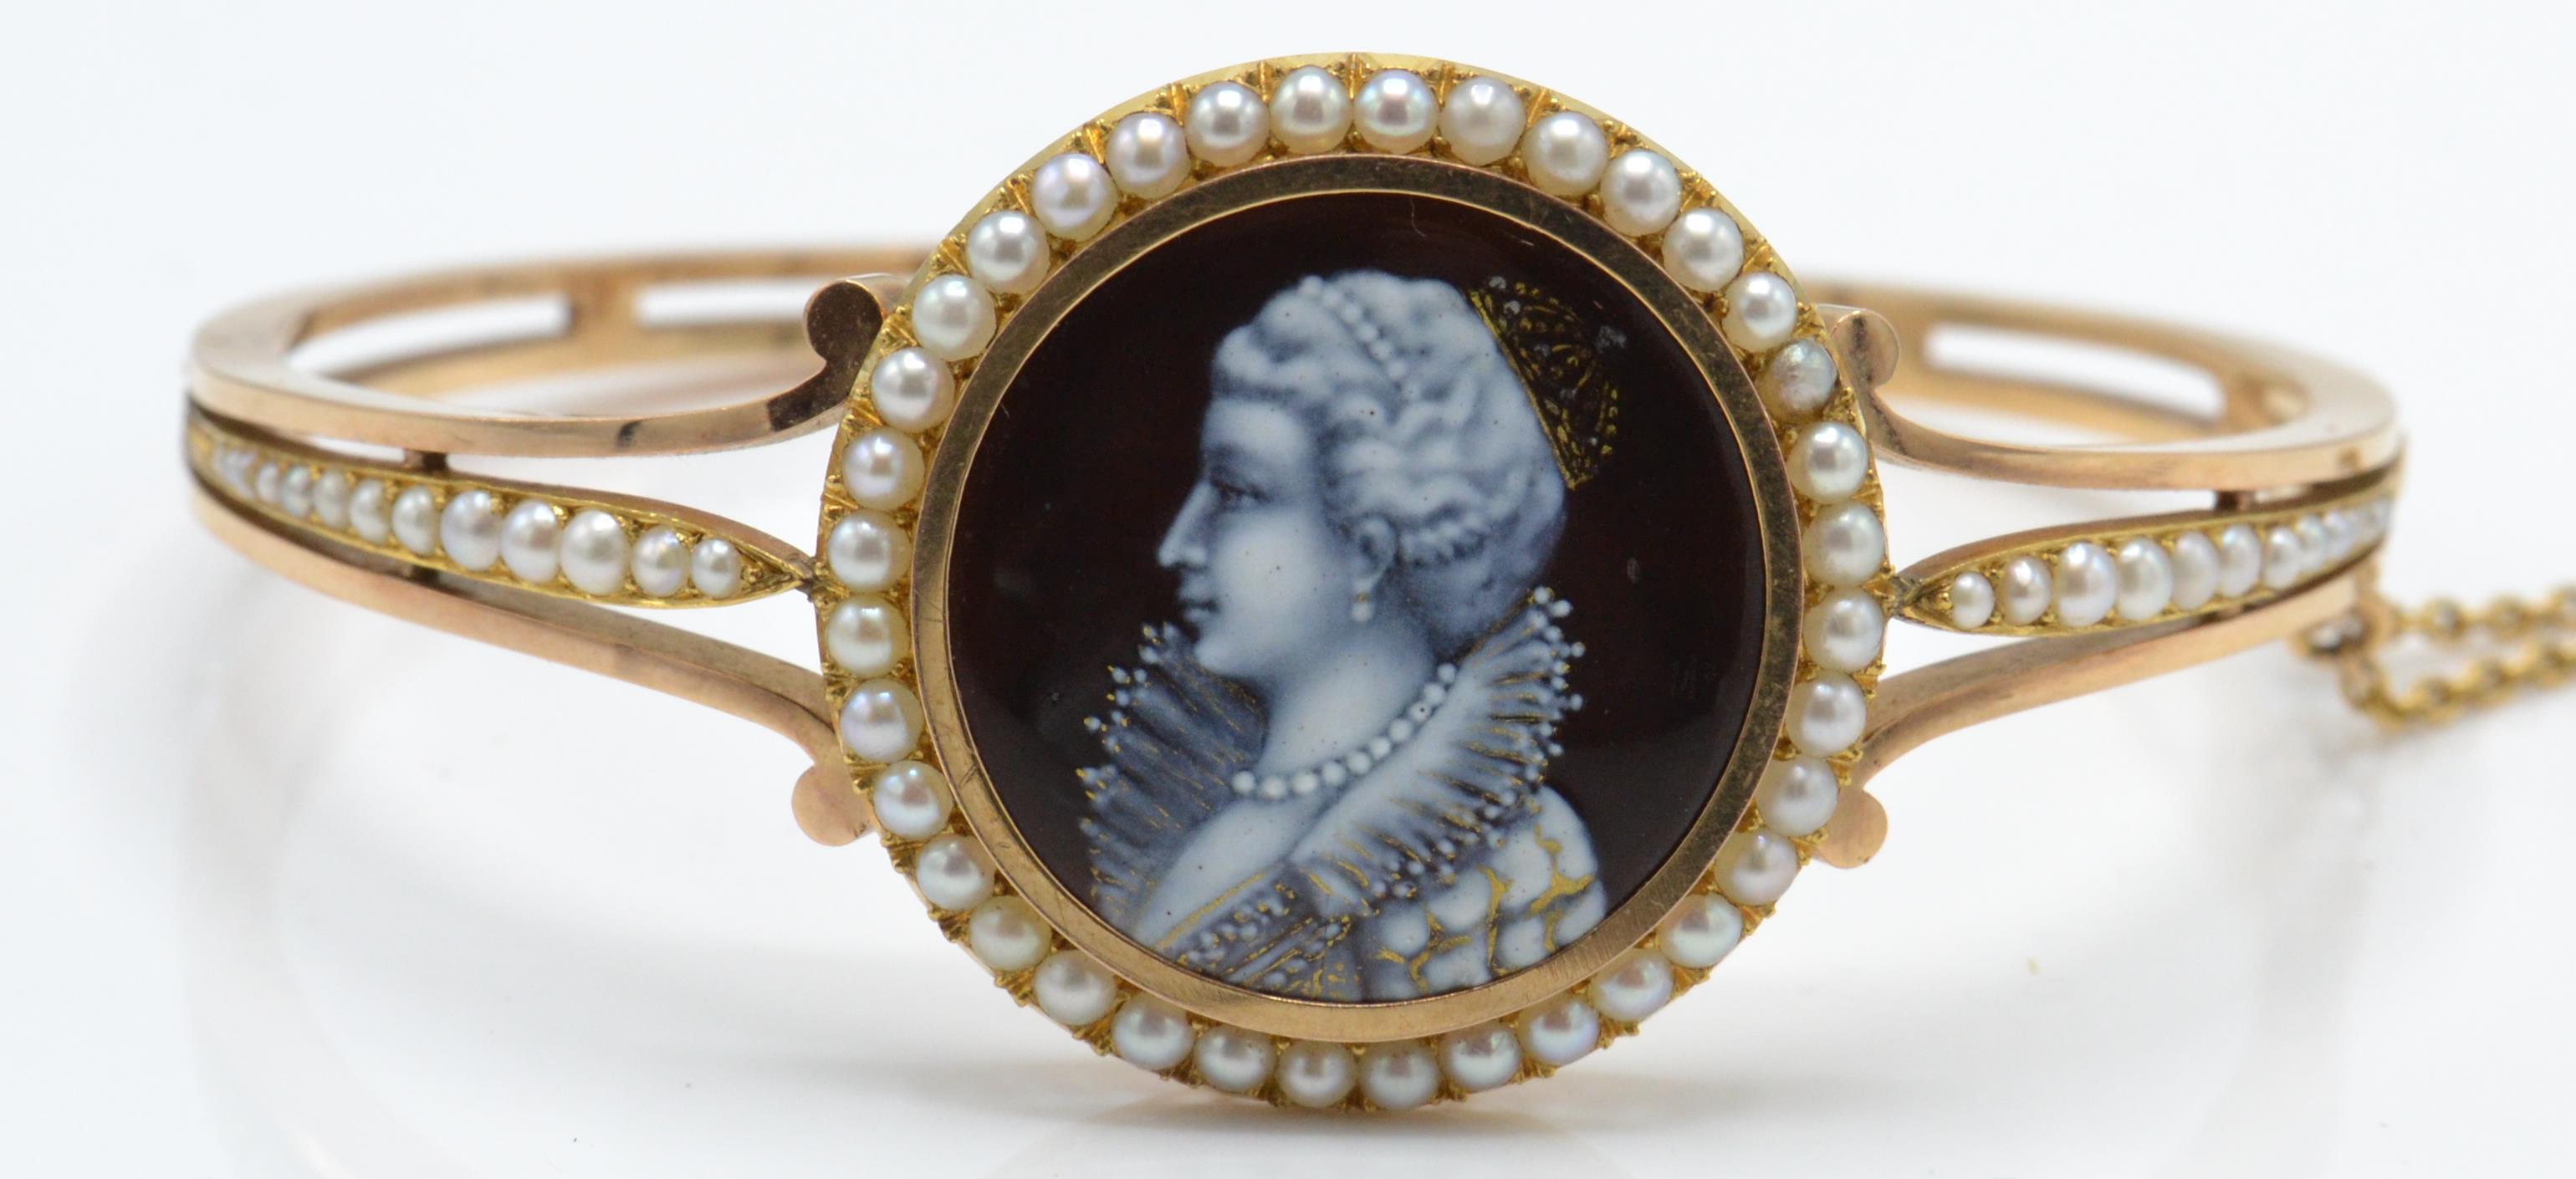 A 19TH CENTURY GOLD & SEED PEARL HINGED BANGLE BRACELET - Image 2 of 5